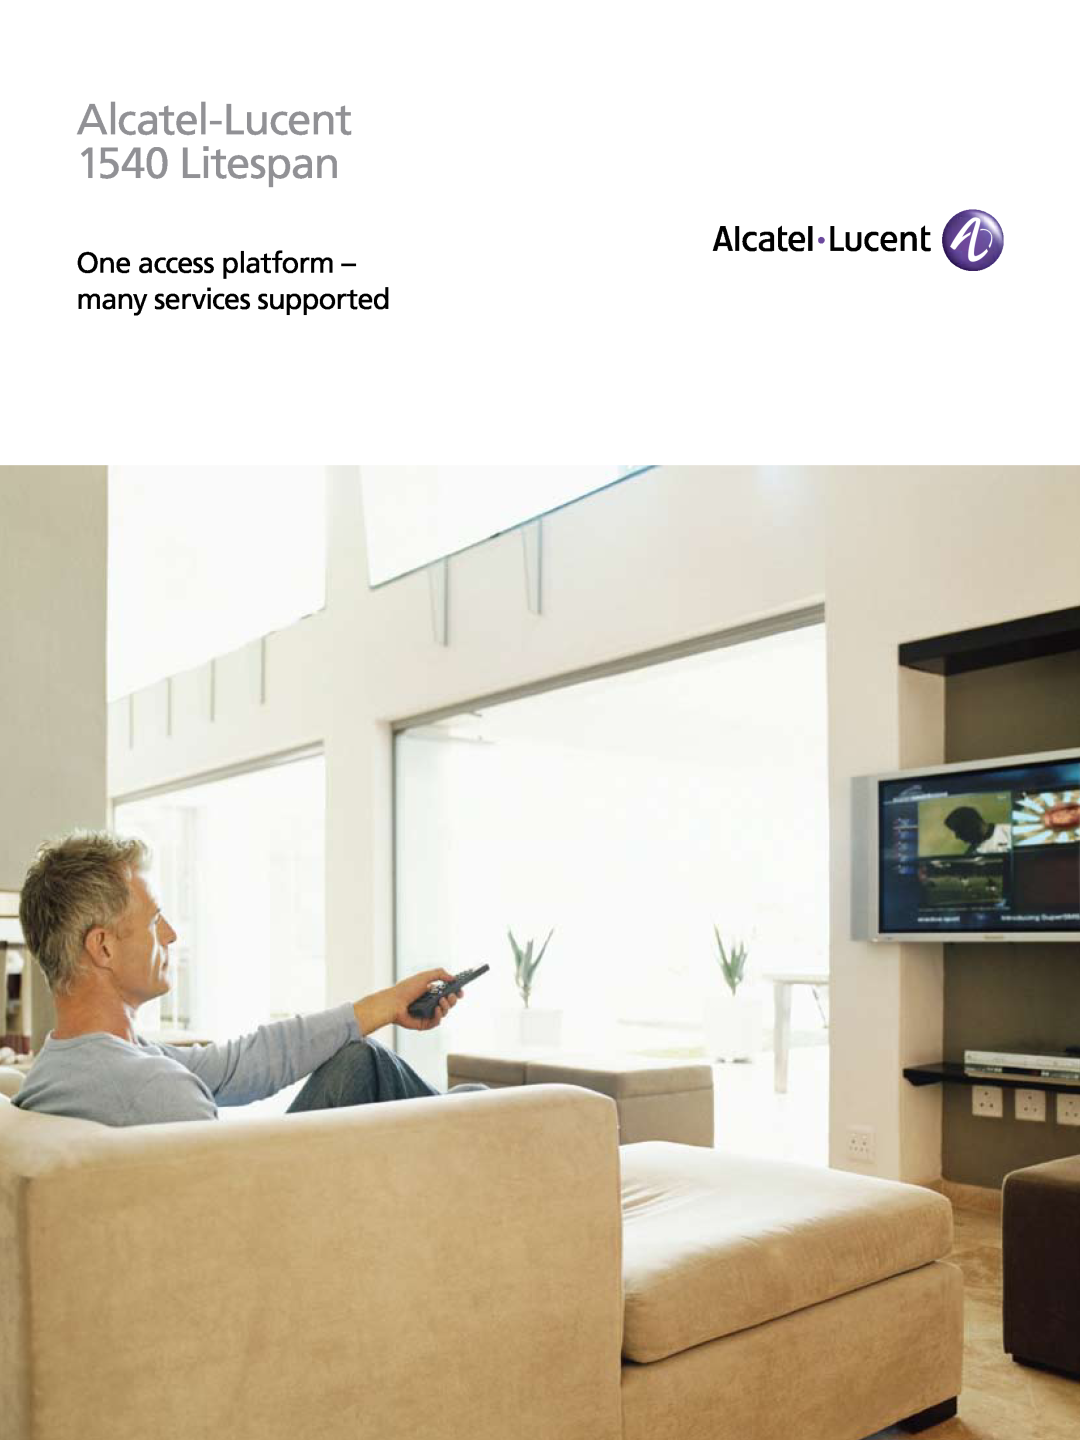 Alcatel-Lucent manual Alcatel-Lucent 1540 Litespan, One access platform - many services supported 